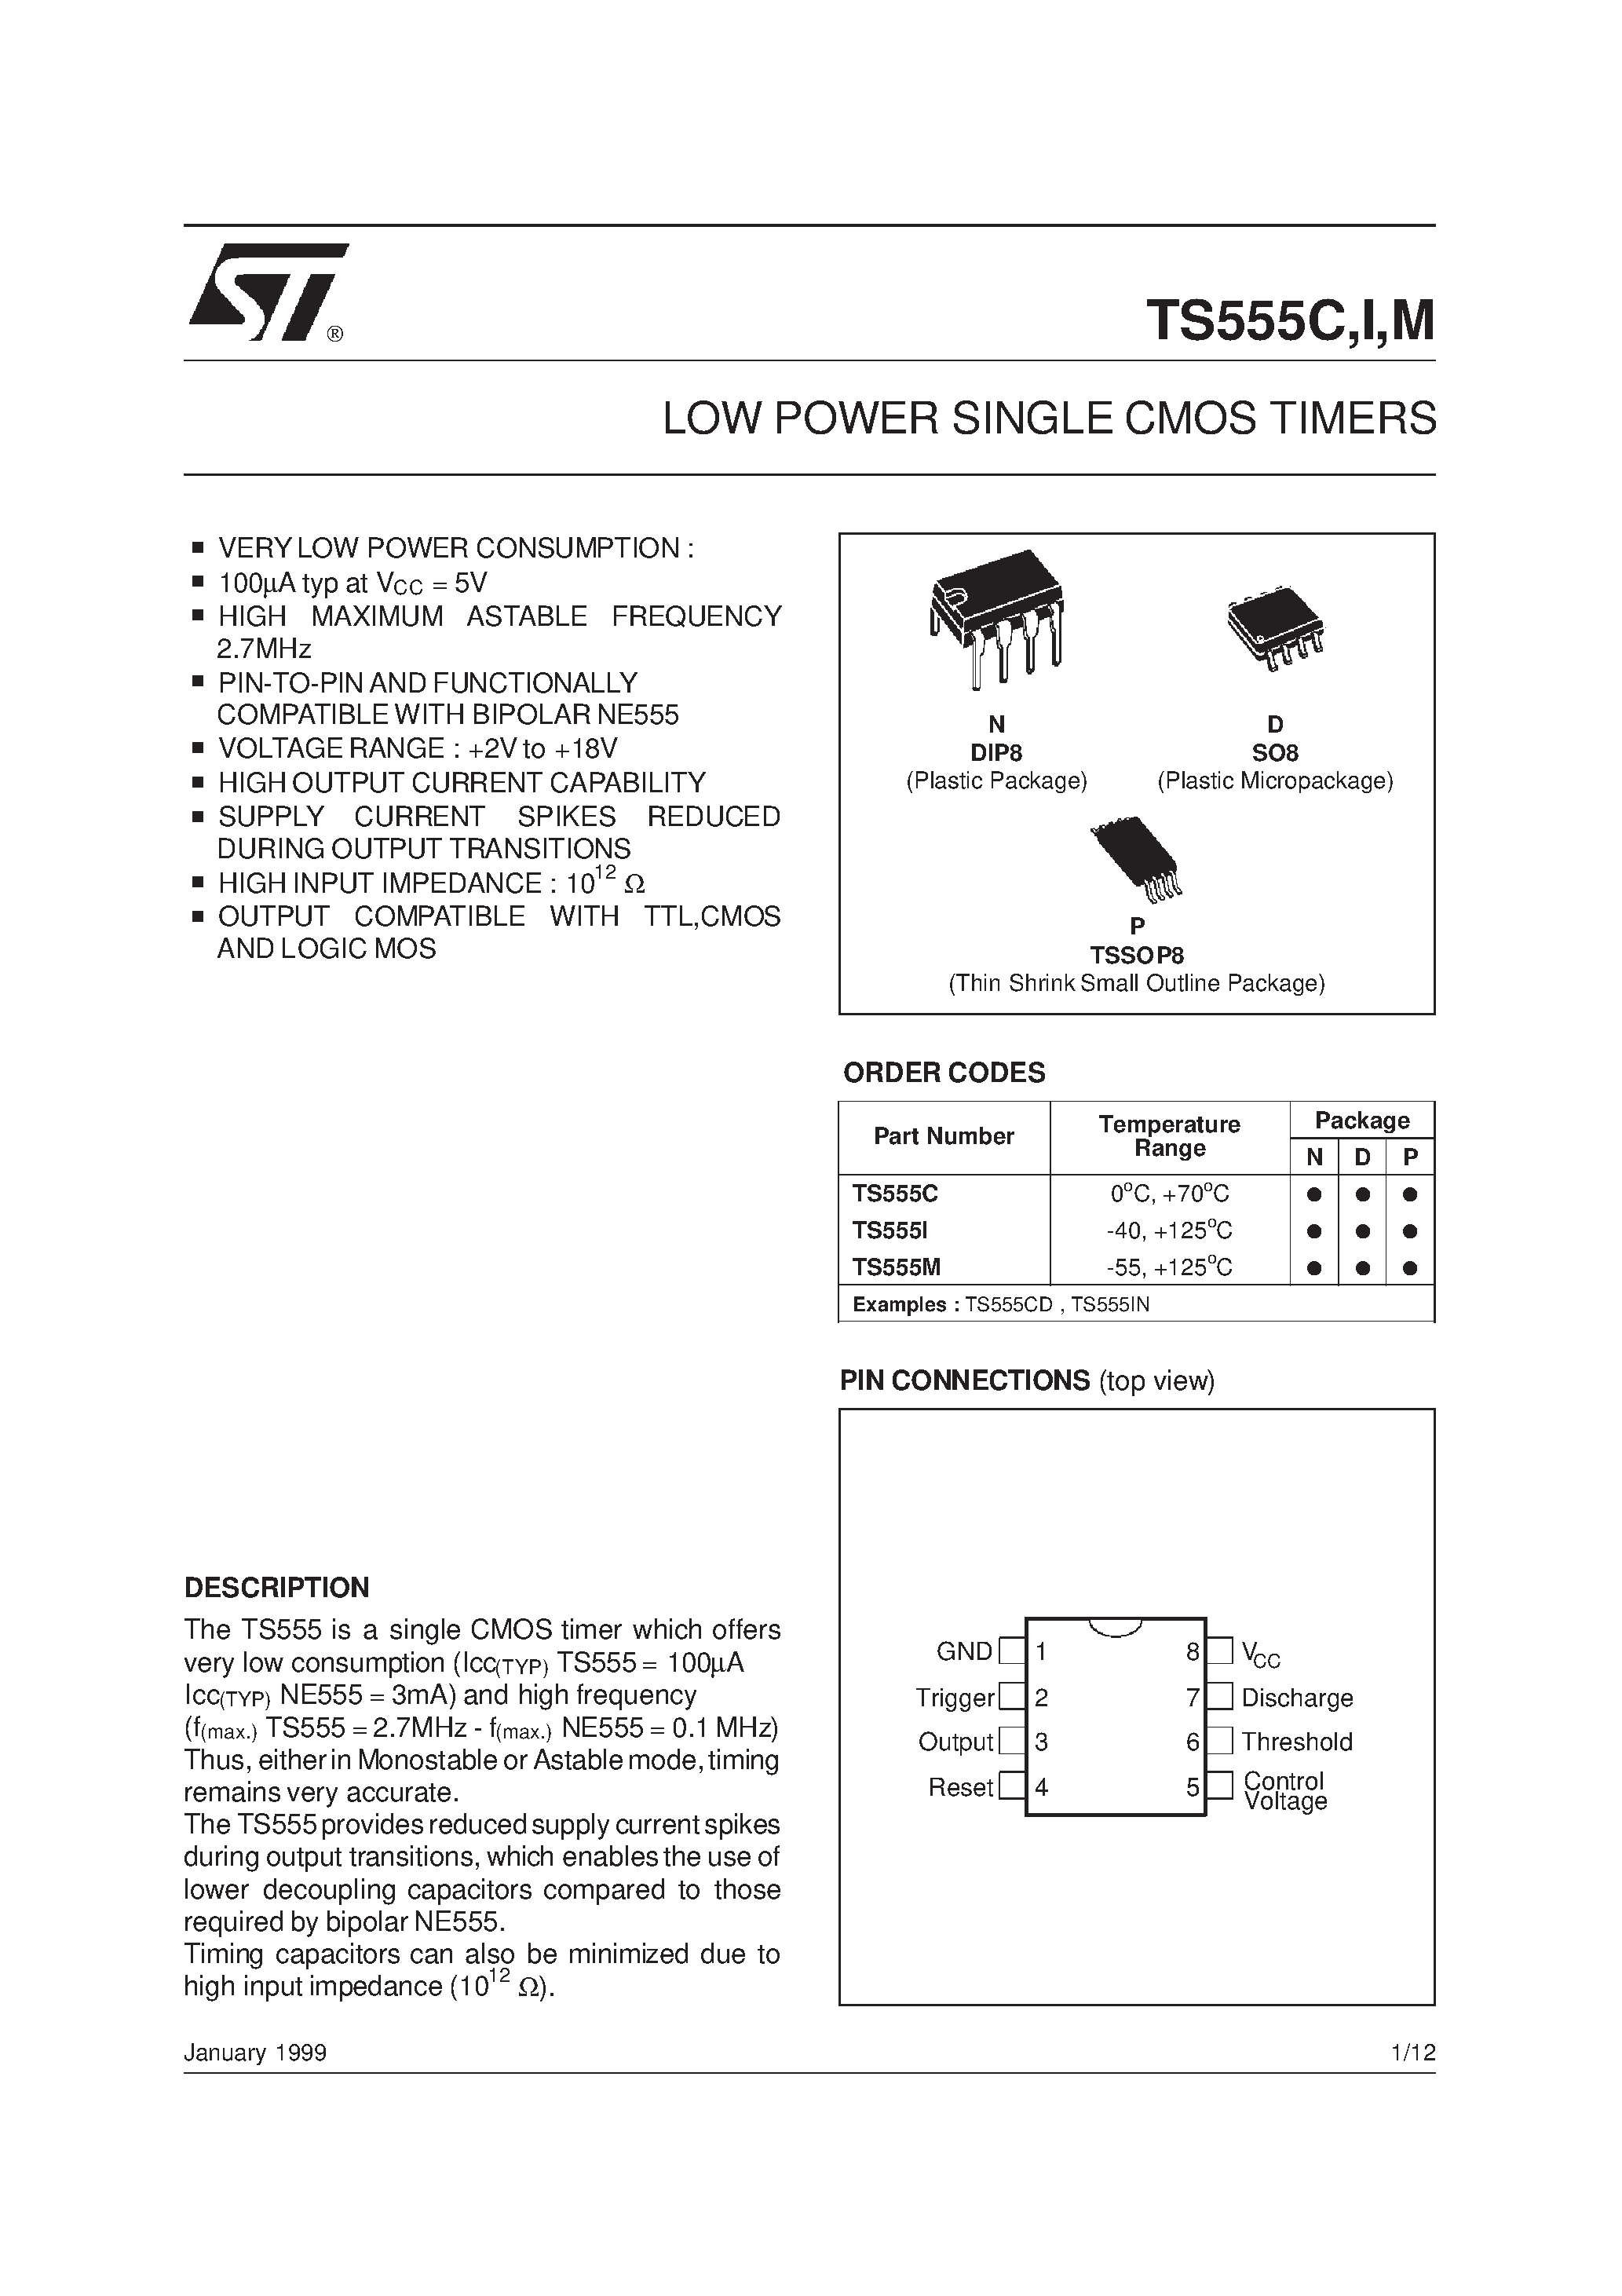 Datasheet TS555I - LOW POWER SINGLE CMOS TIMERS page 1